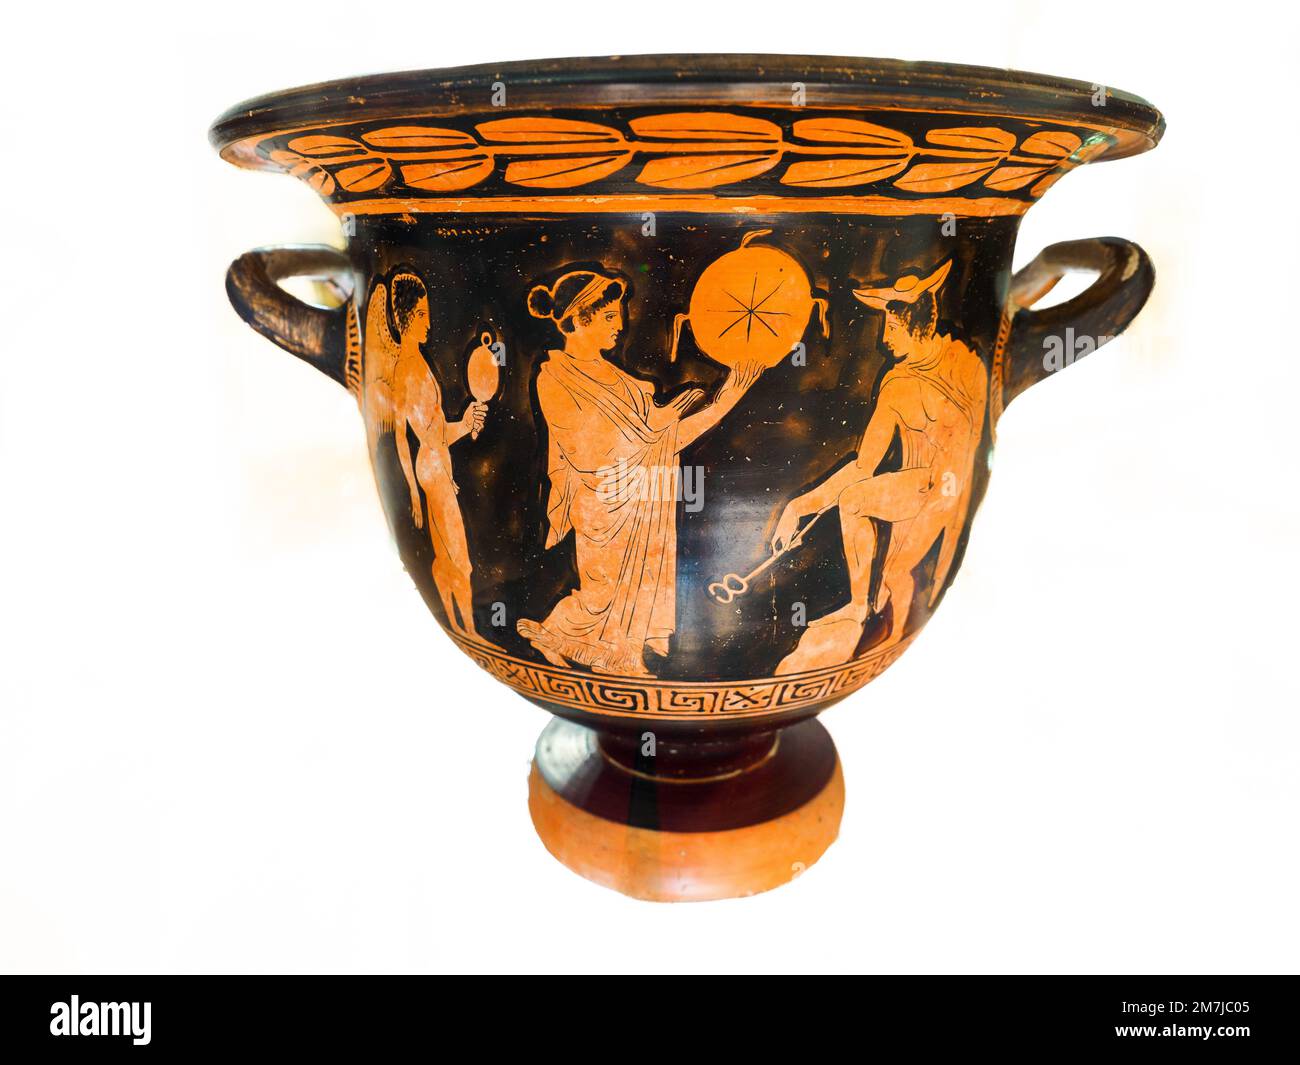 Apulian bell crater in red figure, circa 400 BC, attributed to the Hearst Painter. A woman dressed in chiton and himation with a disk in her left hand moves towards Hermes followed by a cupid (Eros) holding a mirror. Hermes, with his chlamys, caduceus and petasos, rests his right leg on a rocky outcrop. - Archaeological Museum 'Pietro Griffo' of Agrigento - Sicily, Italy Stock Photo